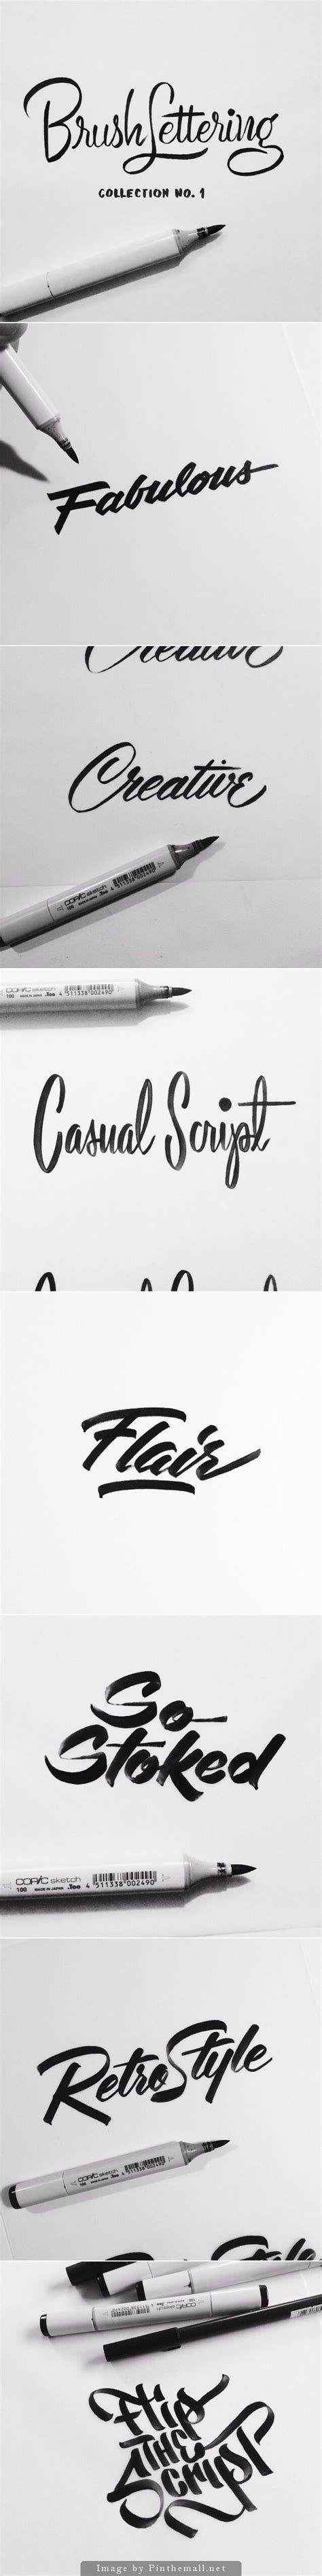 Brush Lettering Collection No 1 Is An Exploration Of Achieving